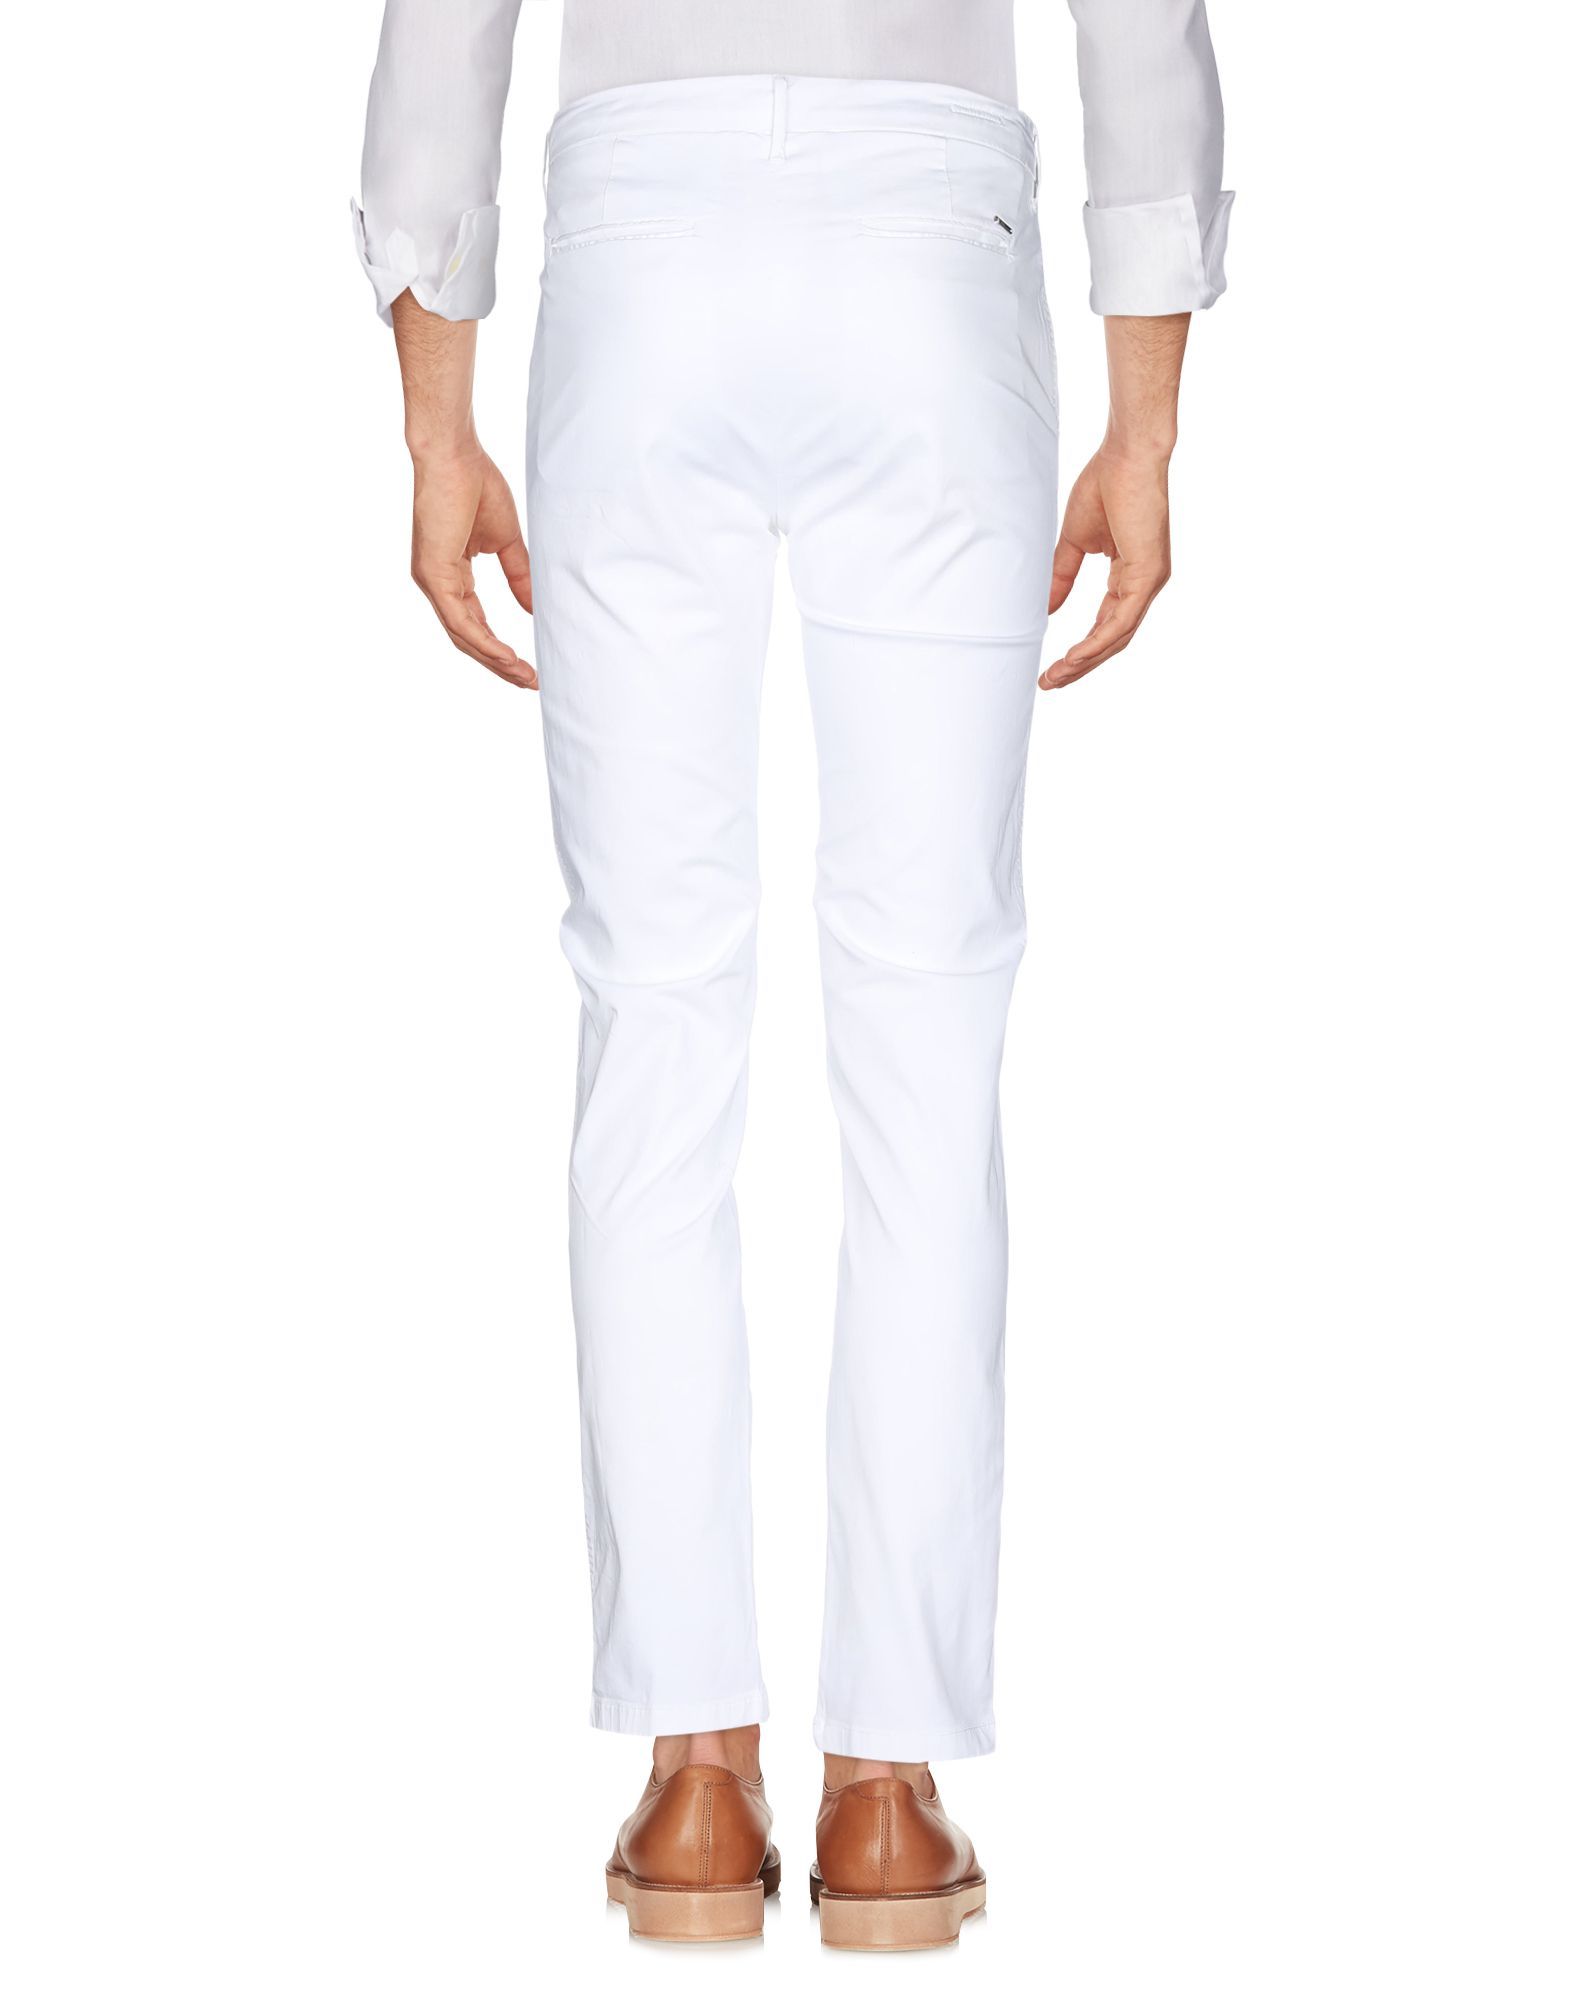 Plain weave<br>No appliqués<br>Basic solid colour<br>Mid Rise<br>Slim fit<br>Tapered leg<br>Button closing<br>Multipockets<br>Stretch<br>Chinos<br>